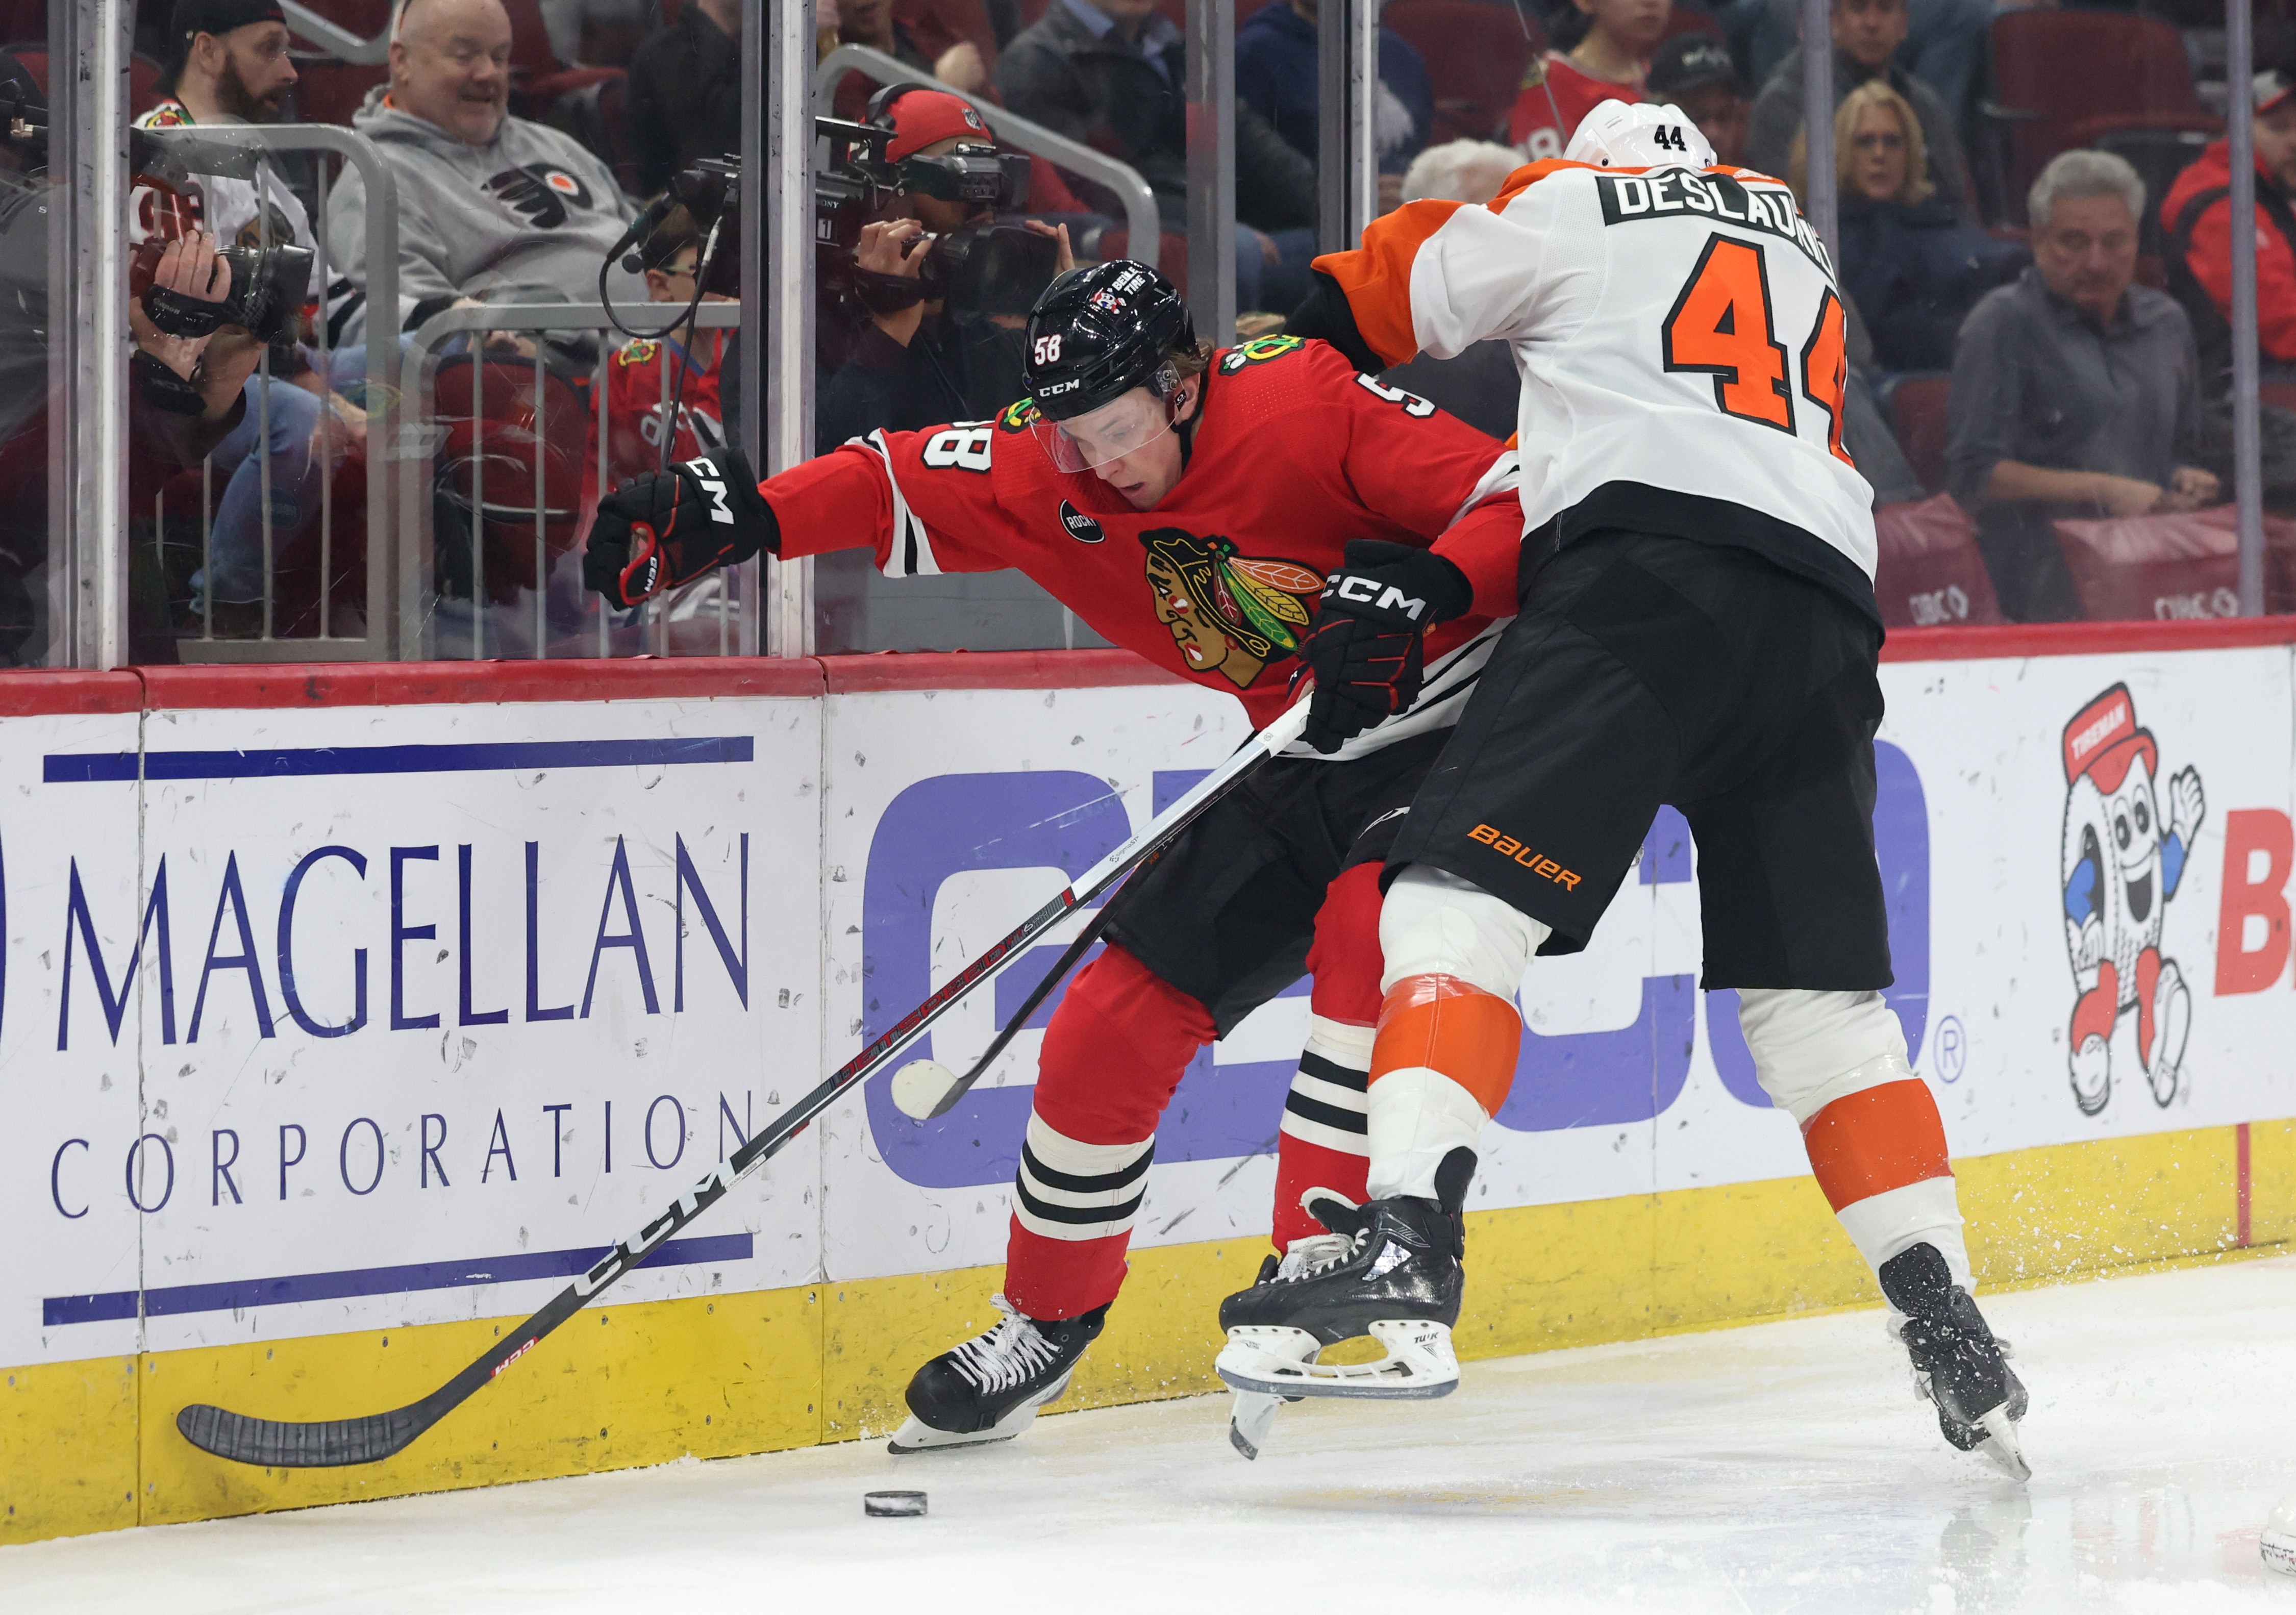 Flyers left wing Nicolas Deslauriers (44) checks on Blackhawks right wing MacKenzie Entwistle (58) during the first period at the United Center on February 21, 2024 in Chicago.  (John J. Kim/Chicago Tribune)